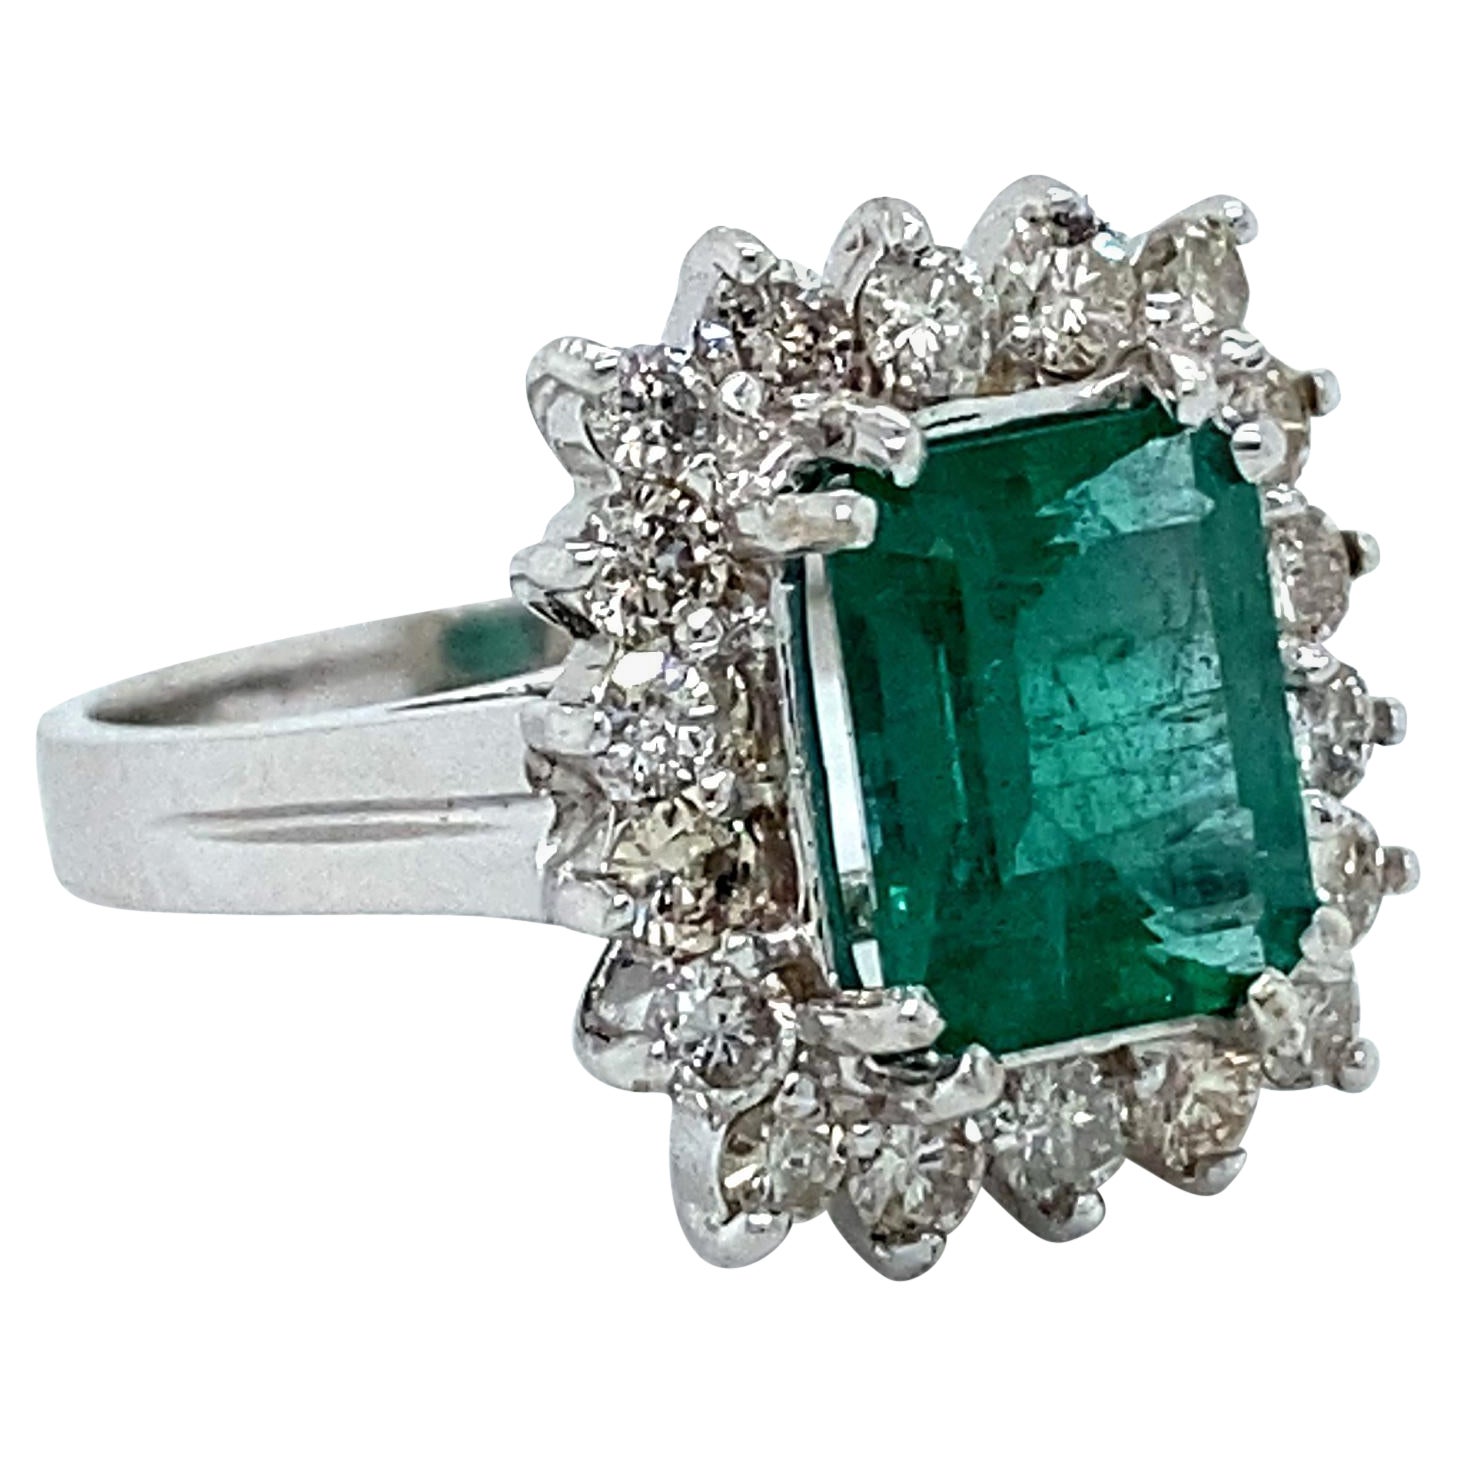 Beautiful Vintage 14k White Gold Emerald and Diamond Halo Ring with AGL Cert